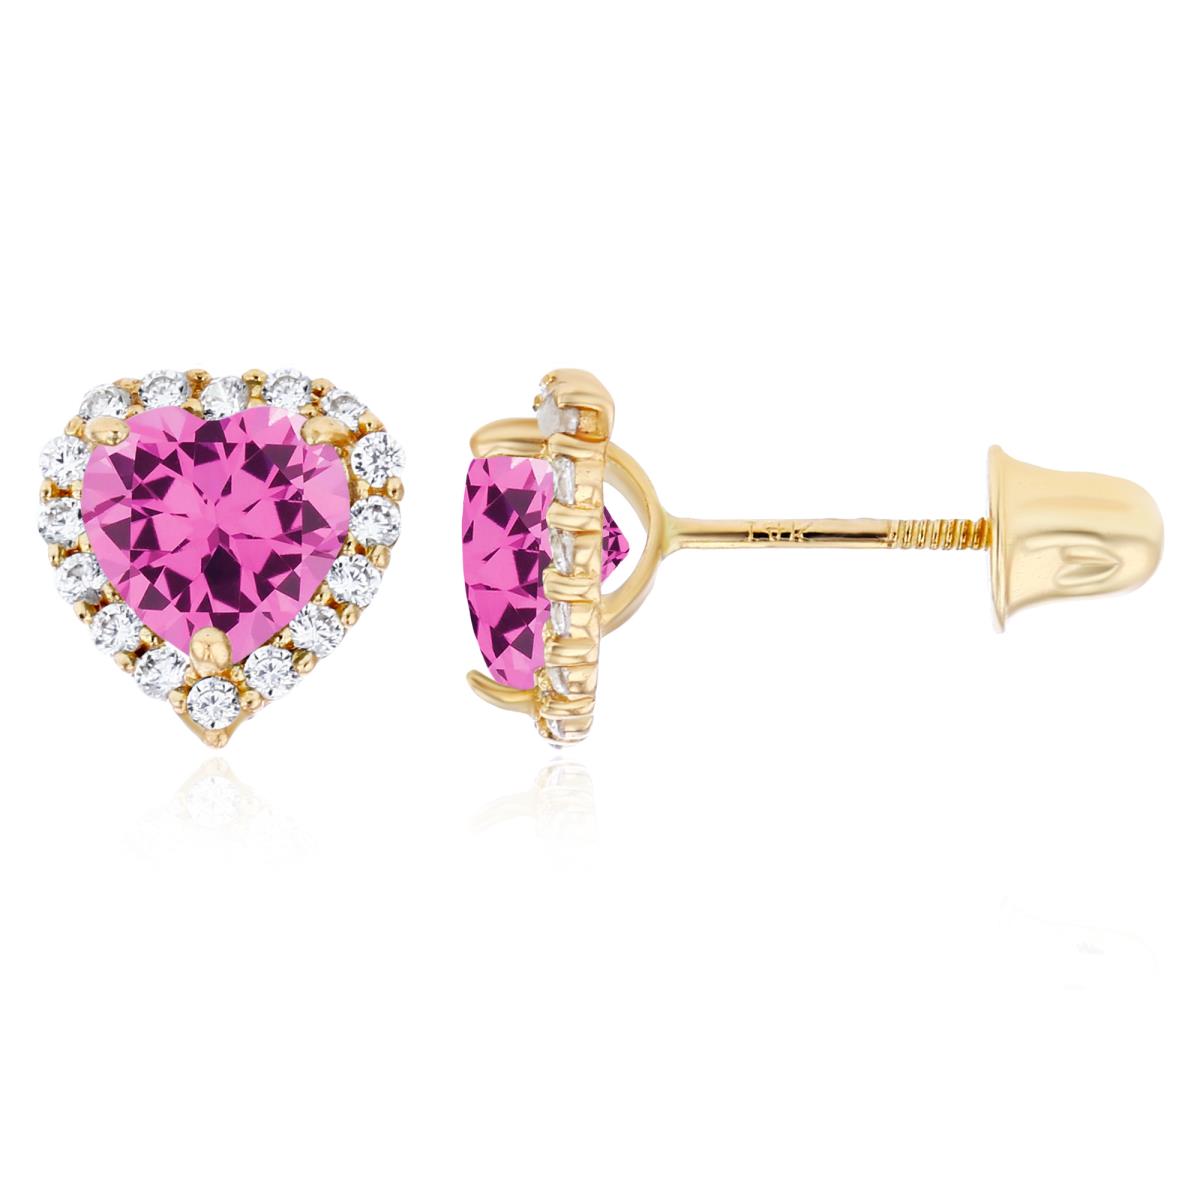 14K Yellow Gold 5mm Heart Created Pink Sapphire & 1mm Created White Sapphire Halo Screwback Earrings